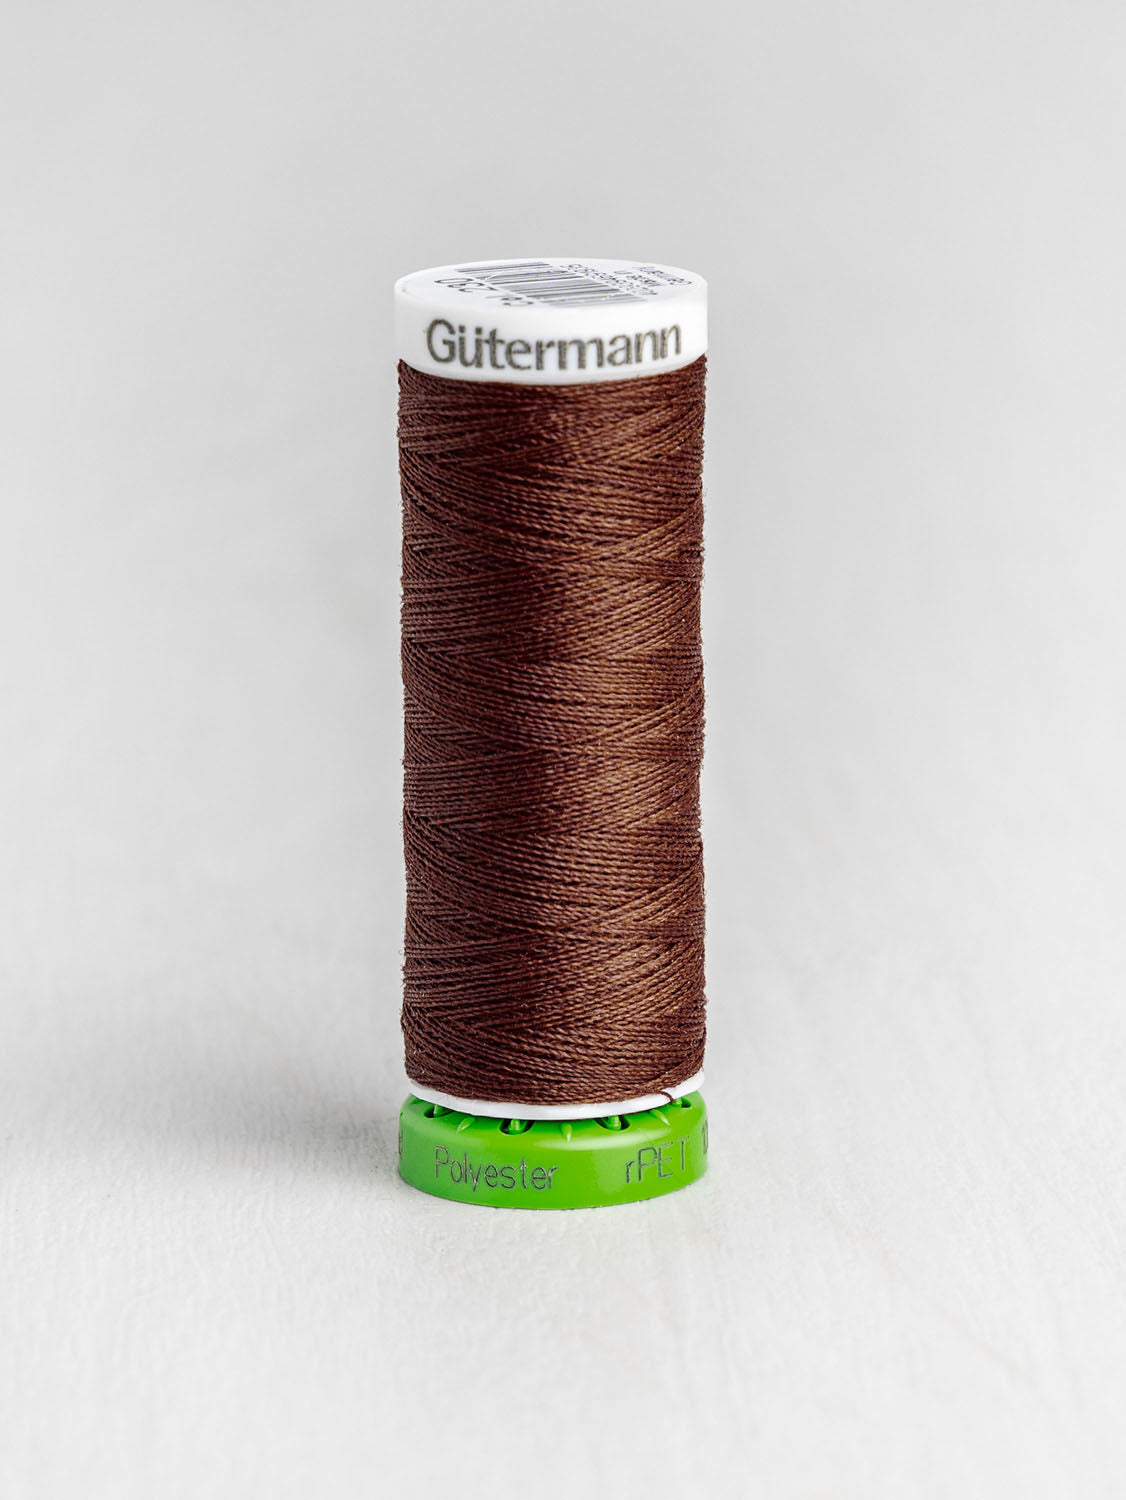 Gütermann All Purpose rPET Recycled Thread - Gingerbread 650